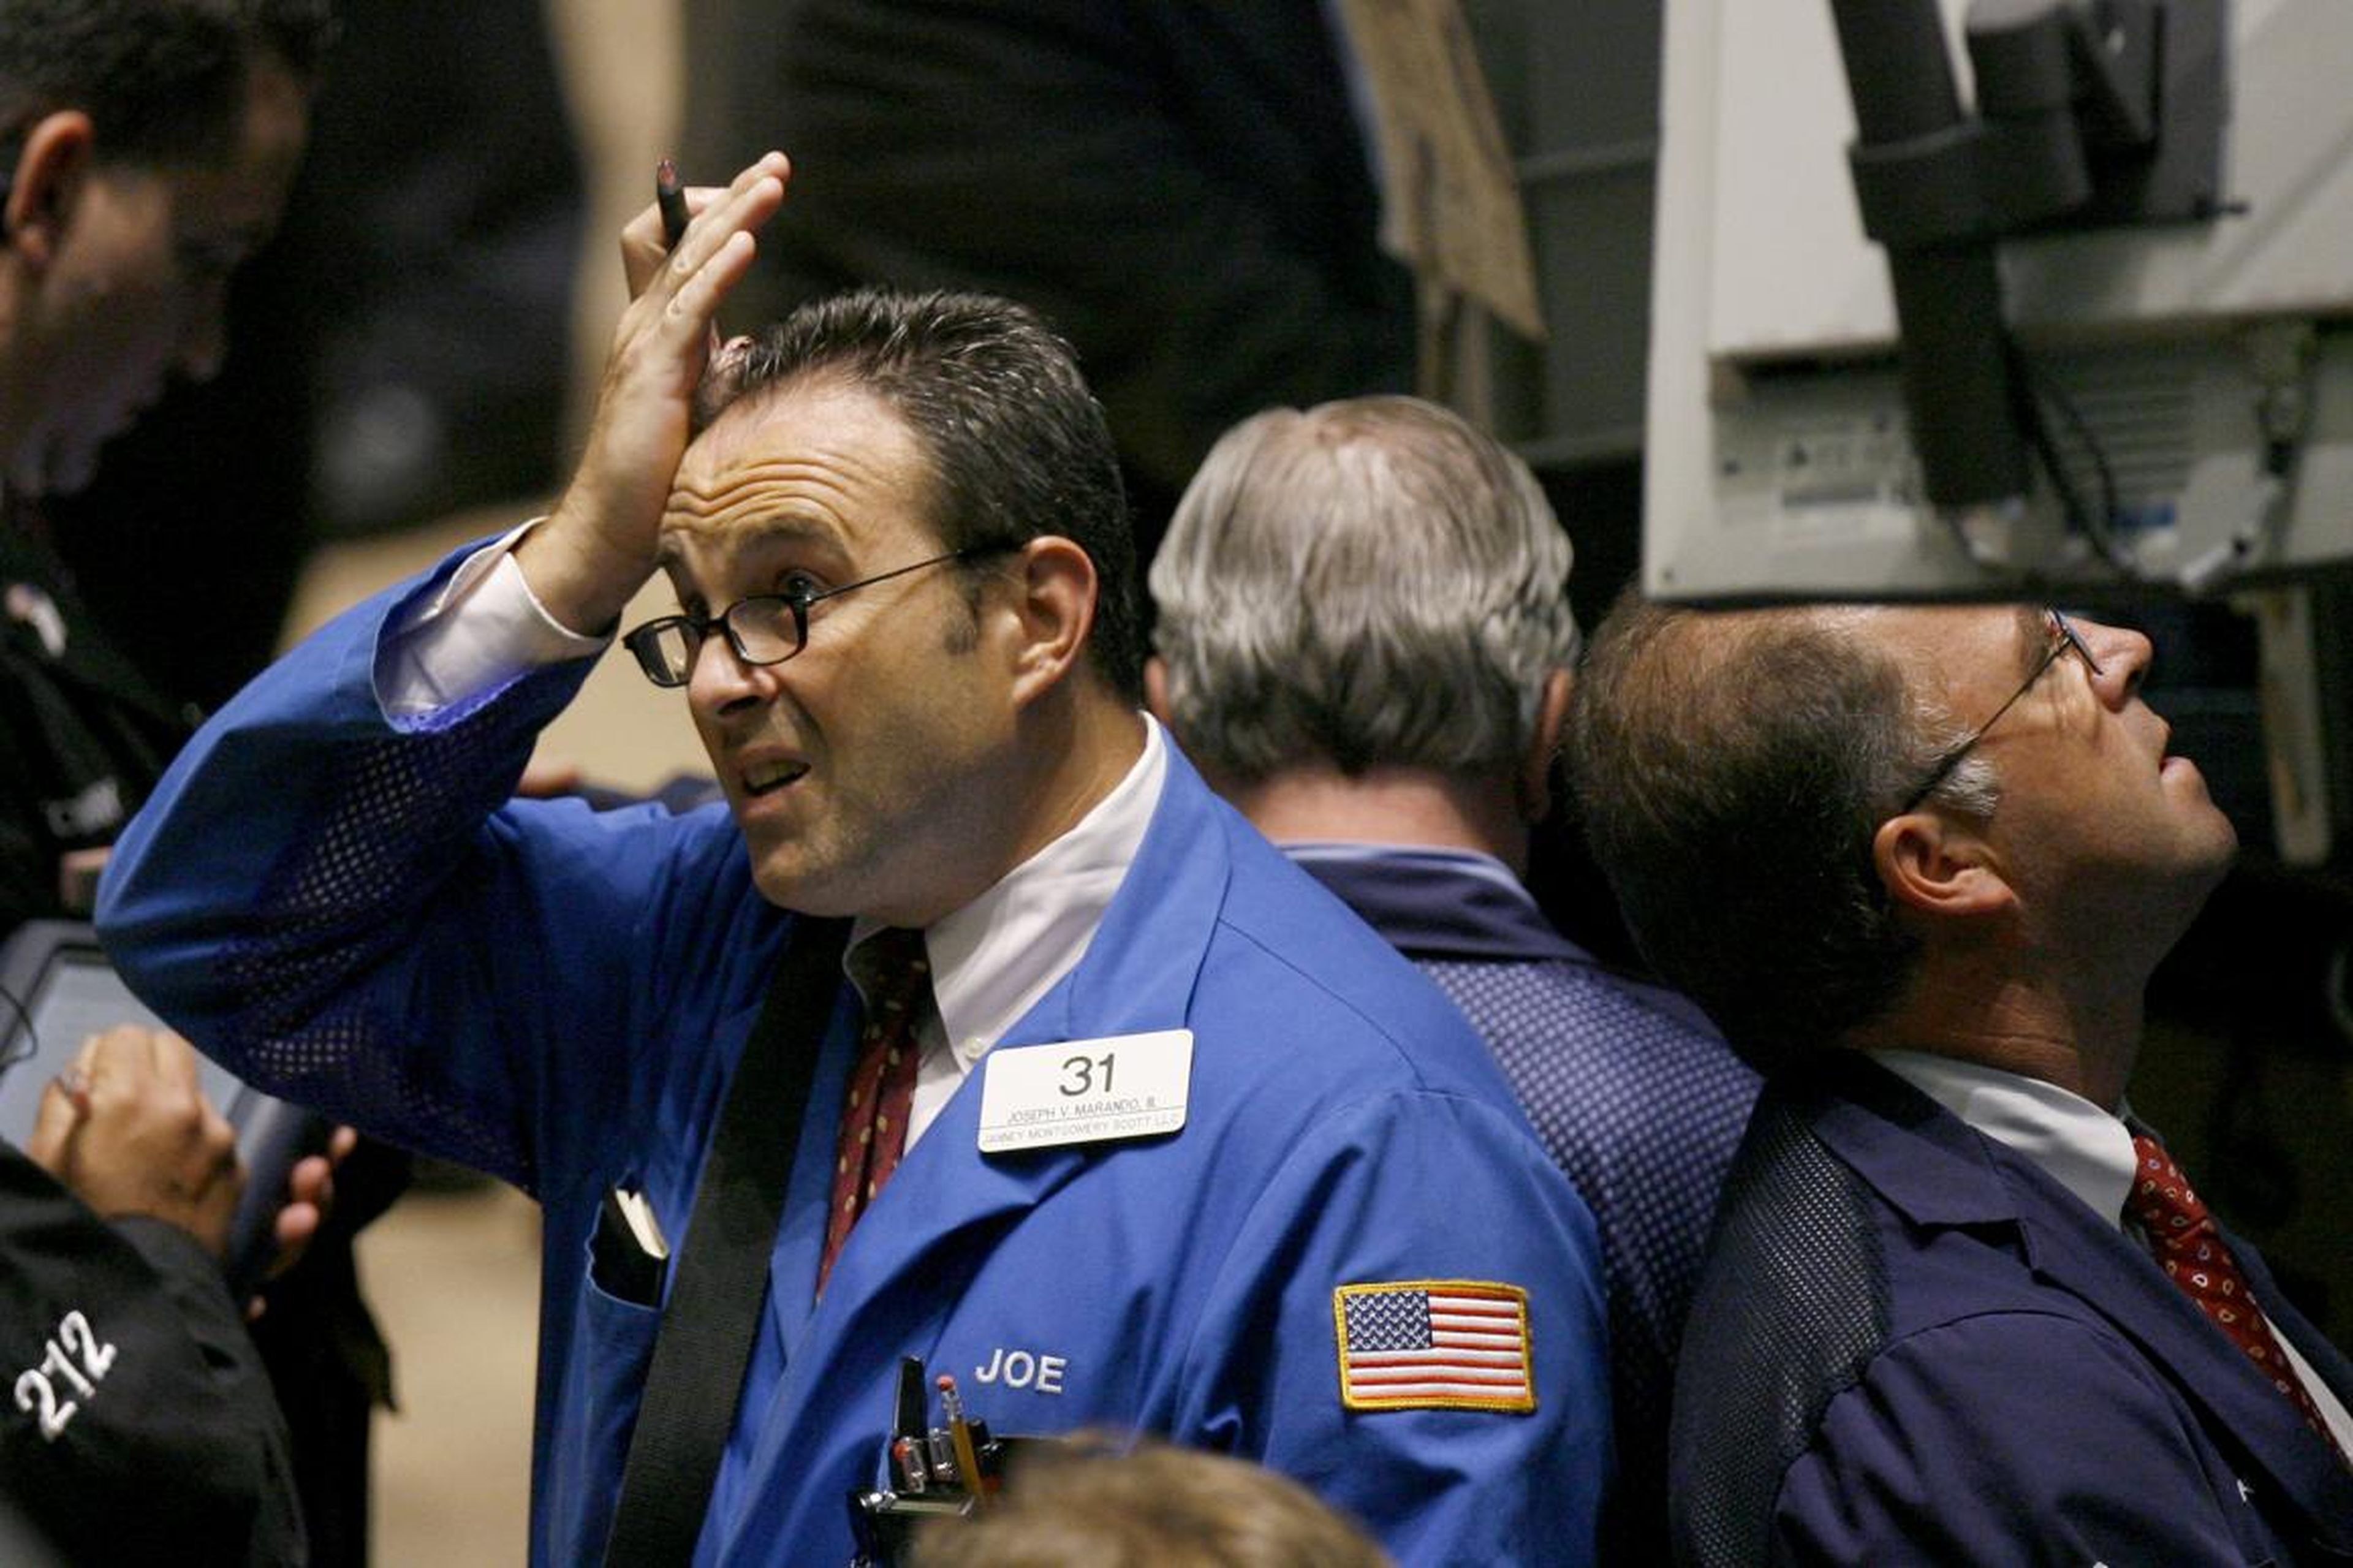 'The market can move for irrational reasons, and you have to be prepared for that'